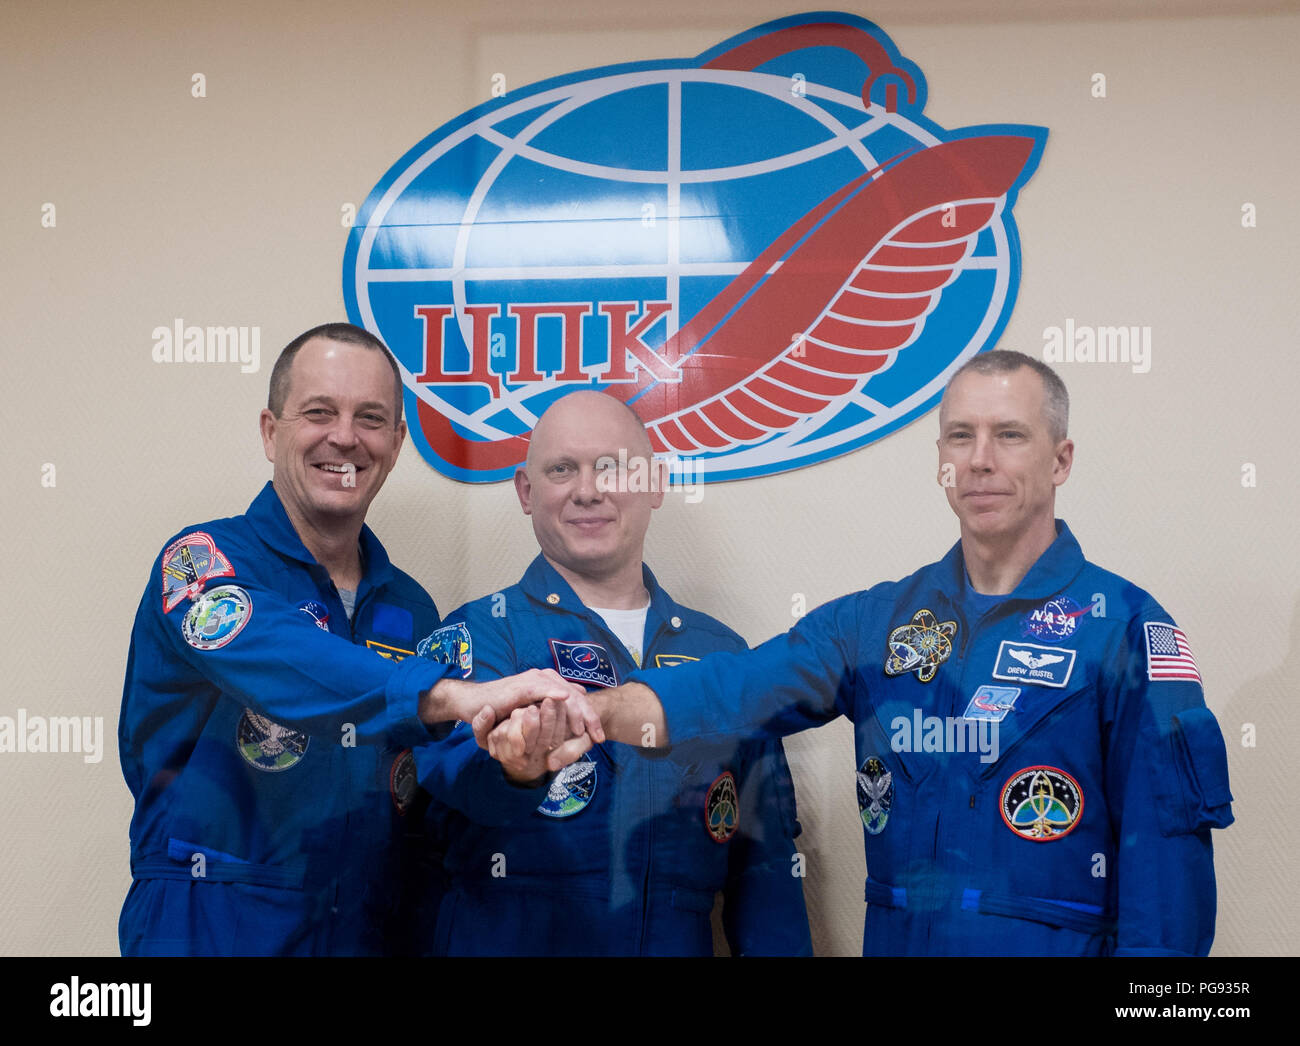 Expedition 55 flight engineer Ricky Arnold of NASA, left, Soyuz Commander Oleg Artemyev of Roscosmos, center, and flight engineer Drew Feustel of NASA, right, pose for a picture at the conclusion of a press conference, Tuesday, March 20, 2018 at the Cosmonaut Hotel in Baikonur, Kazakhstan. Arnold, Artemyev, and Feustel are scheduled to launch to the International Space Station aboard the Soyuz MS-08 spacecraft on Wednesday, March, 21. Stock Photo